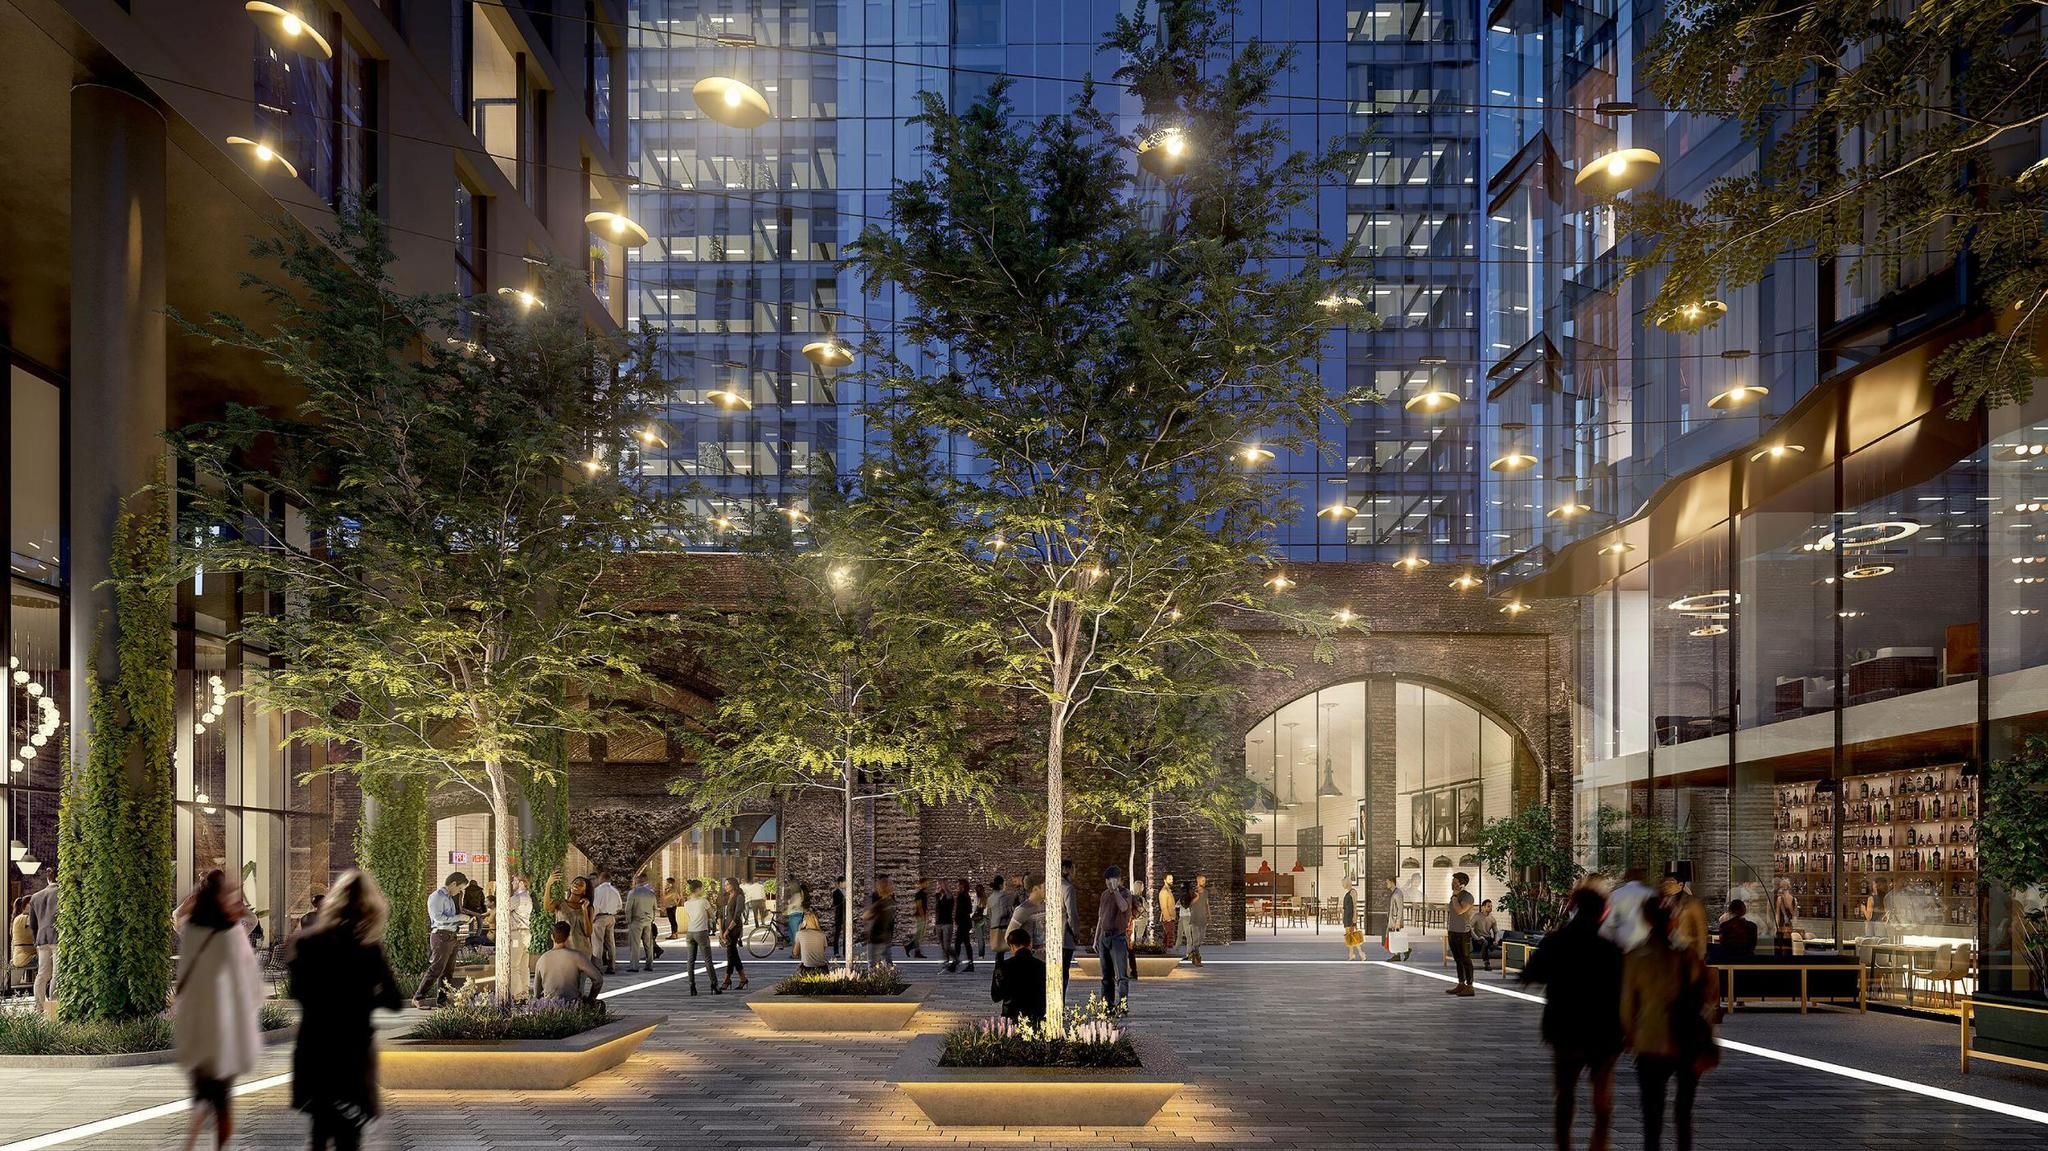 Property developer commits to building '1bn project near Tate Modern